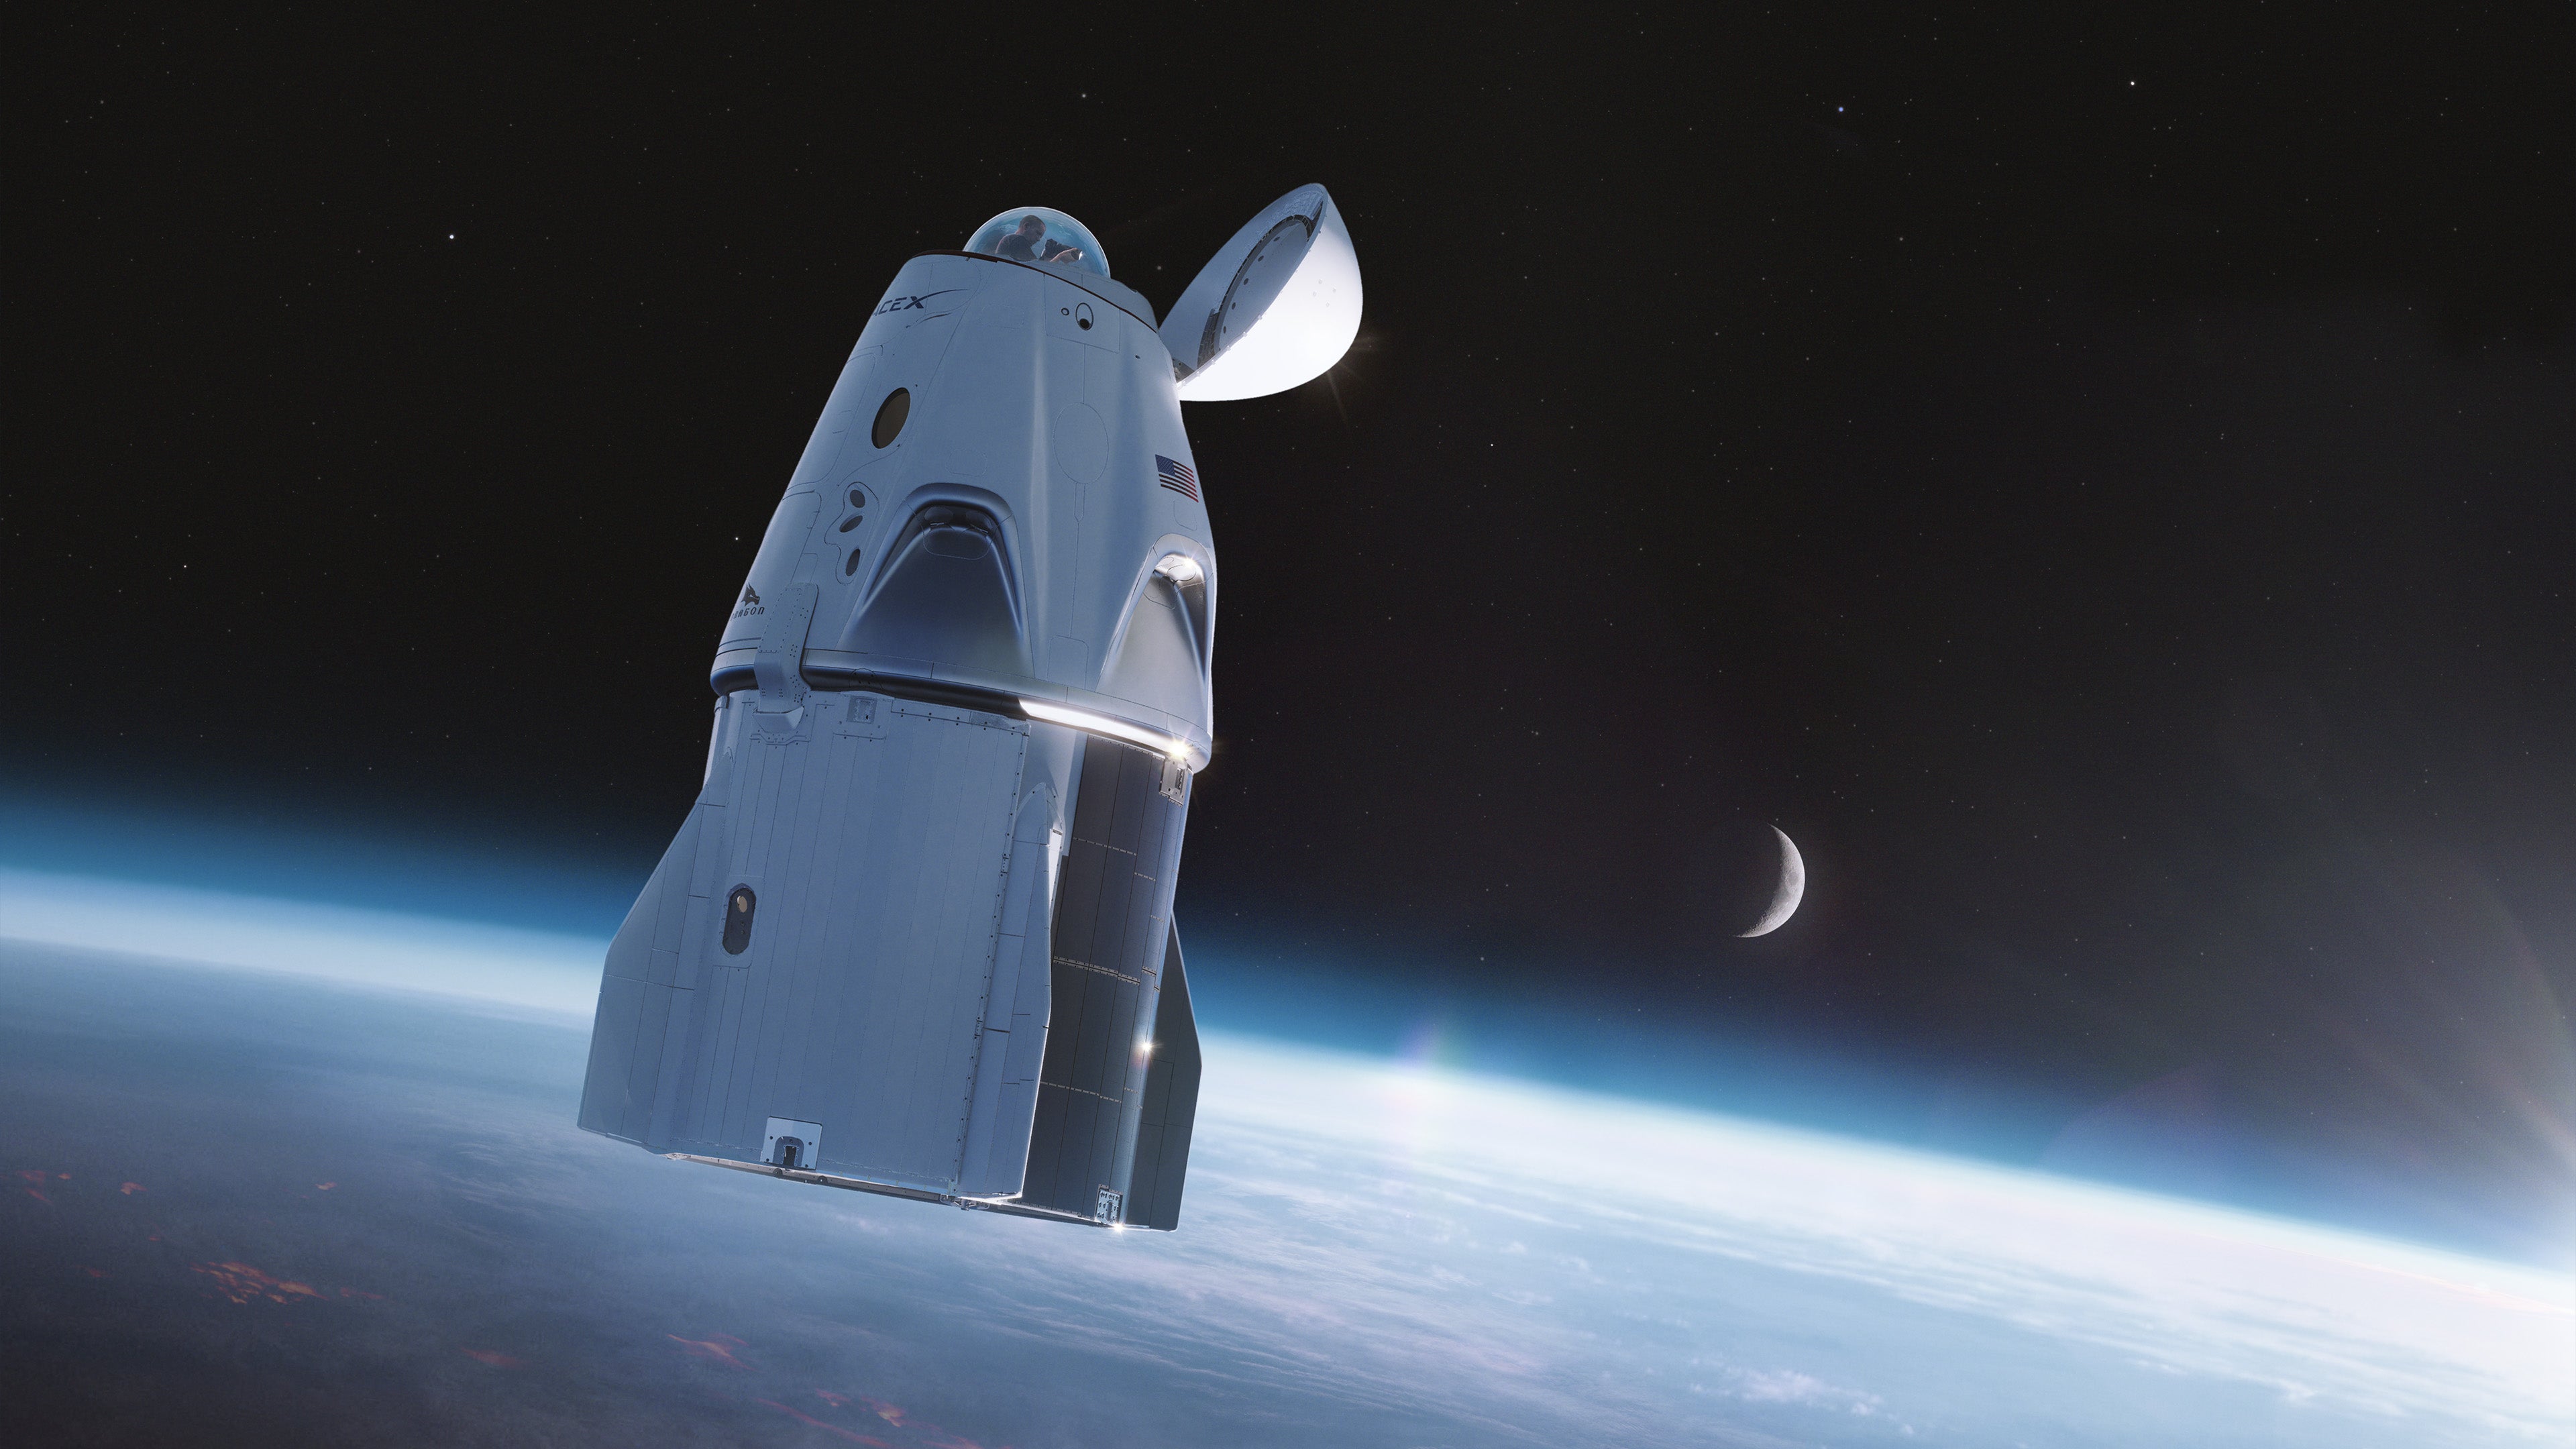 SpaceX Crew Dragon Will Feature A Dome Window Addition For The Inspiration4 Mission